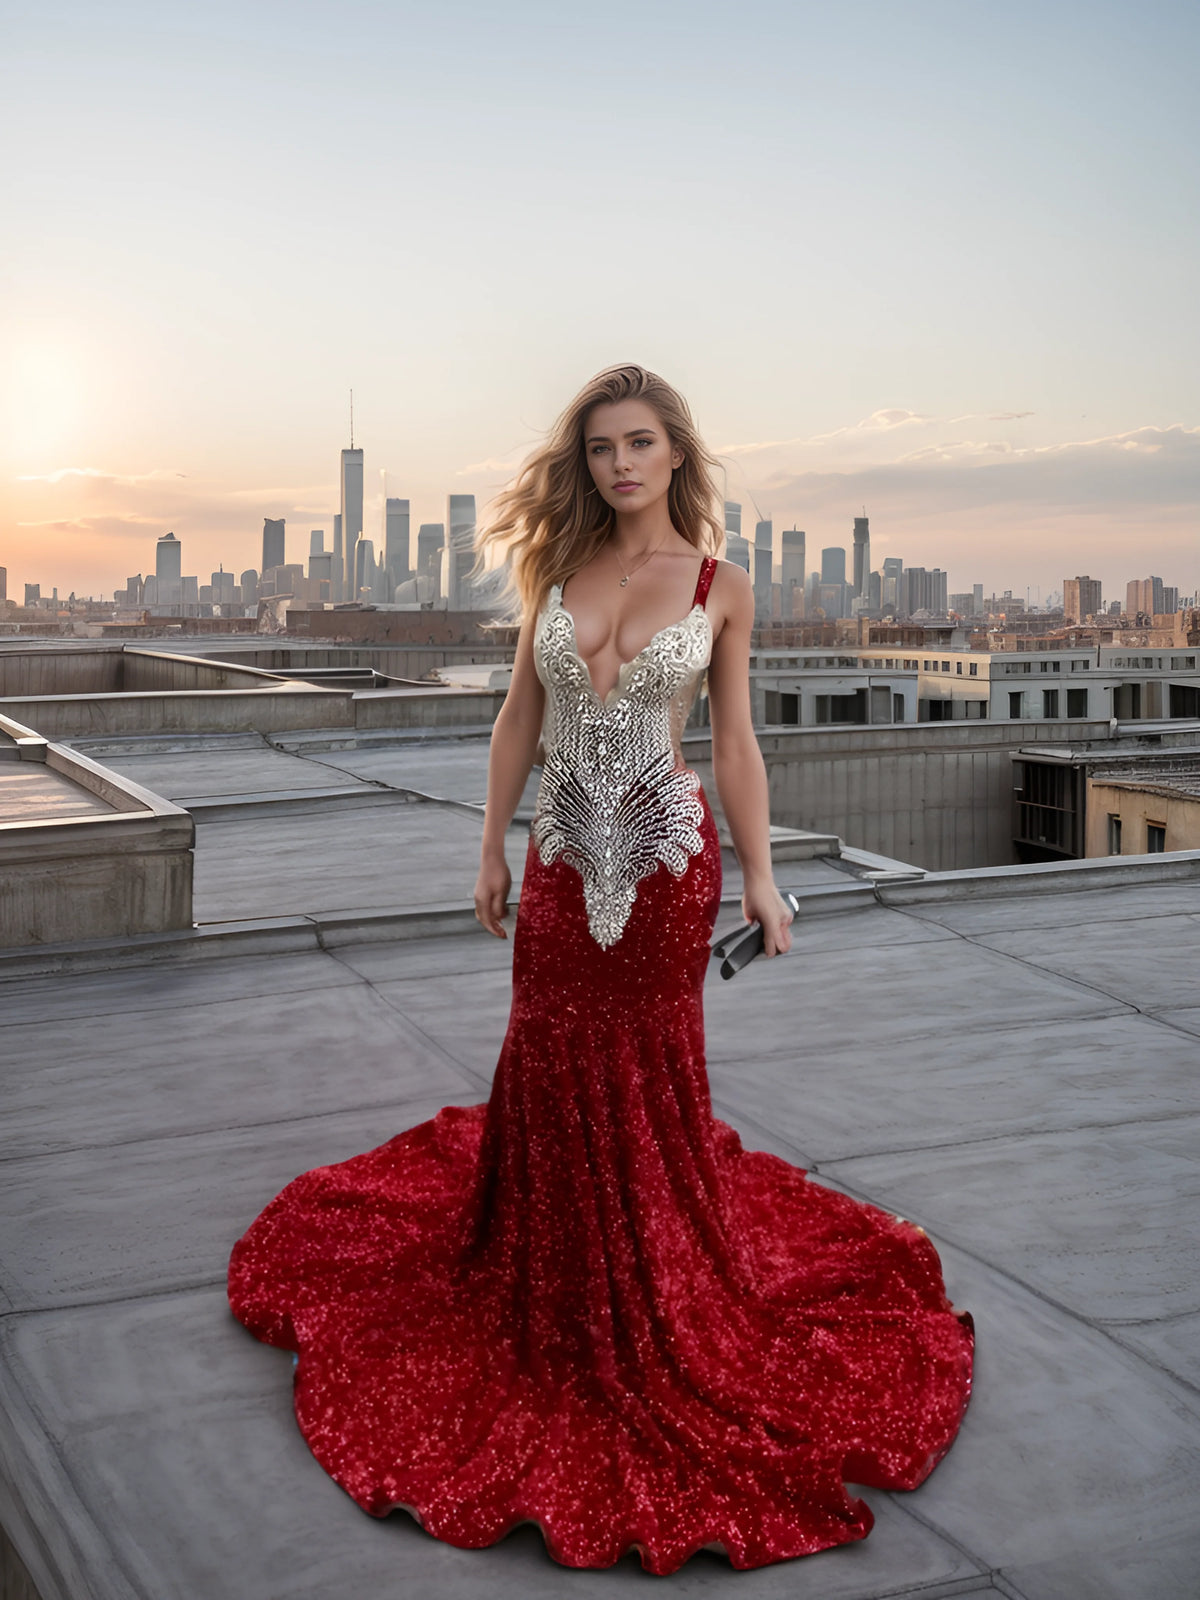 Red Prom Dress - Sparkling Silver Diamond Crystals, Mermaid Style